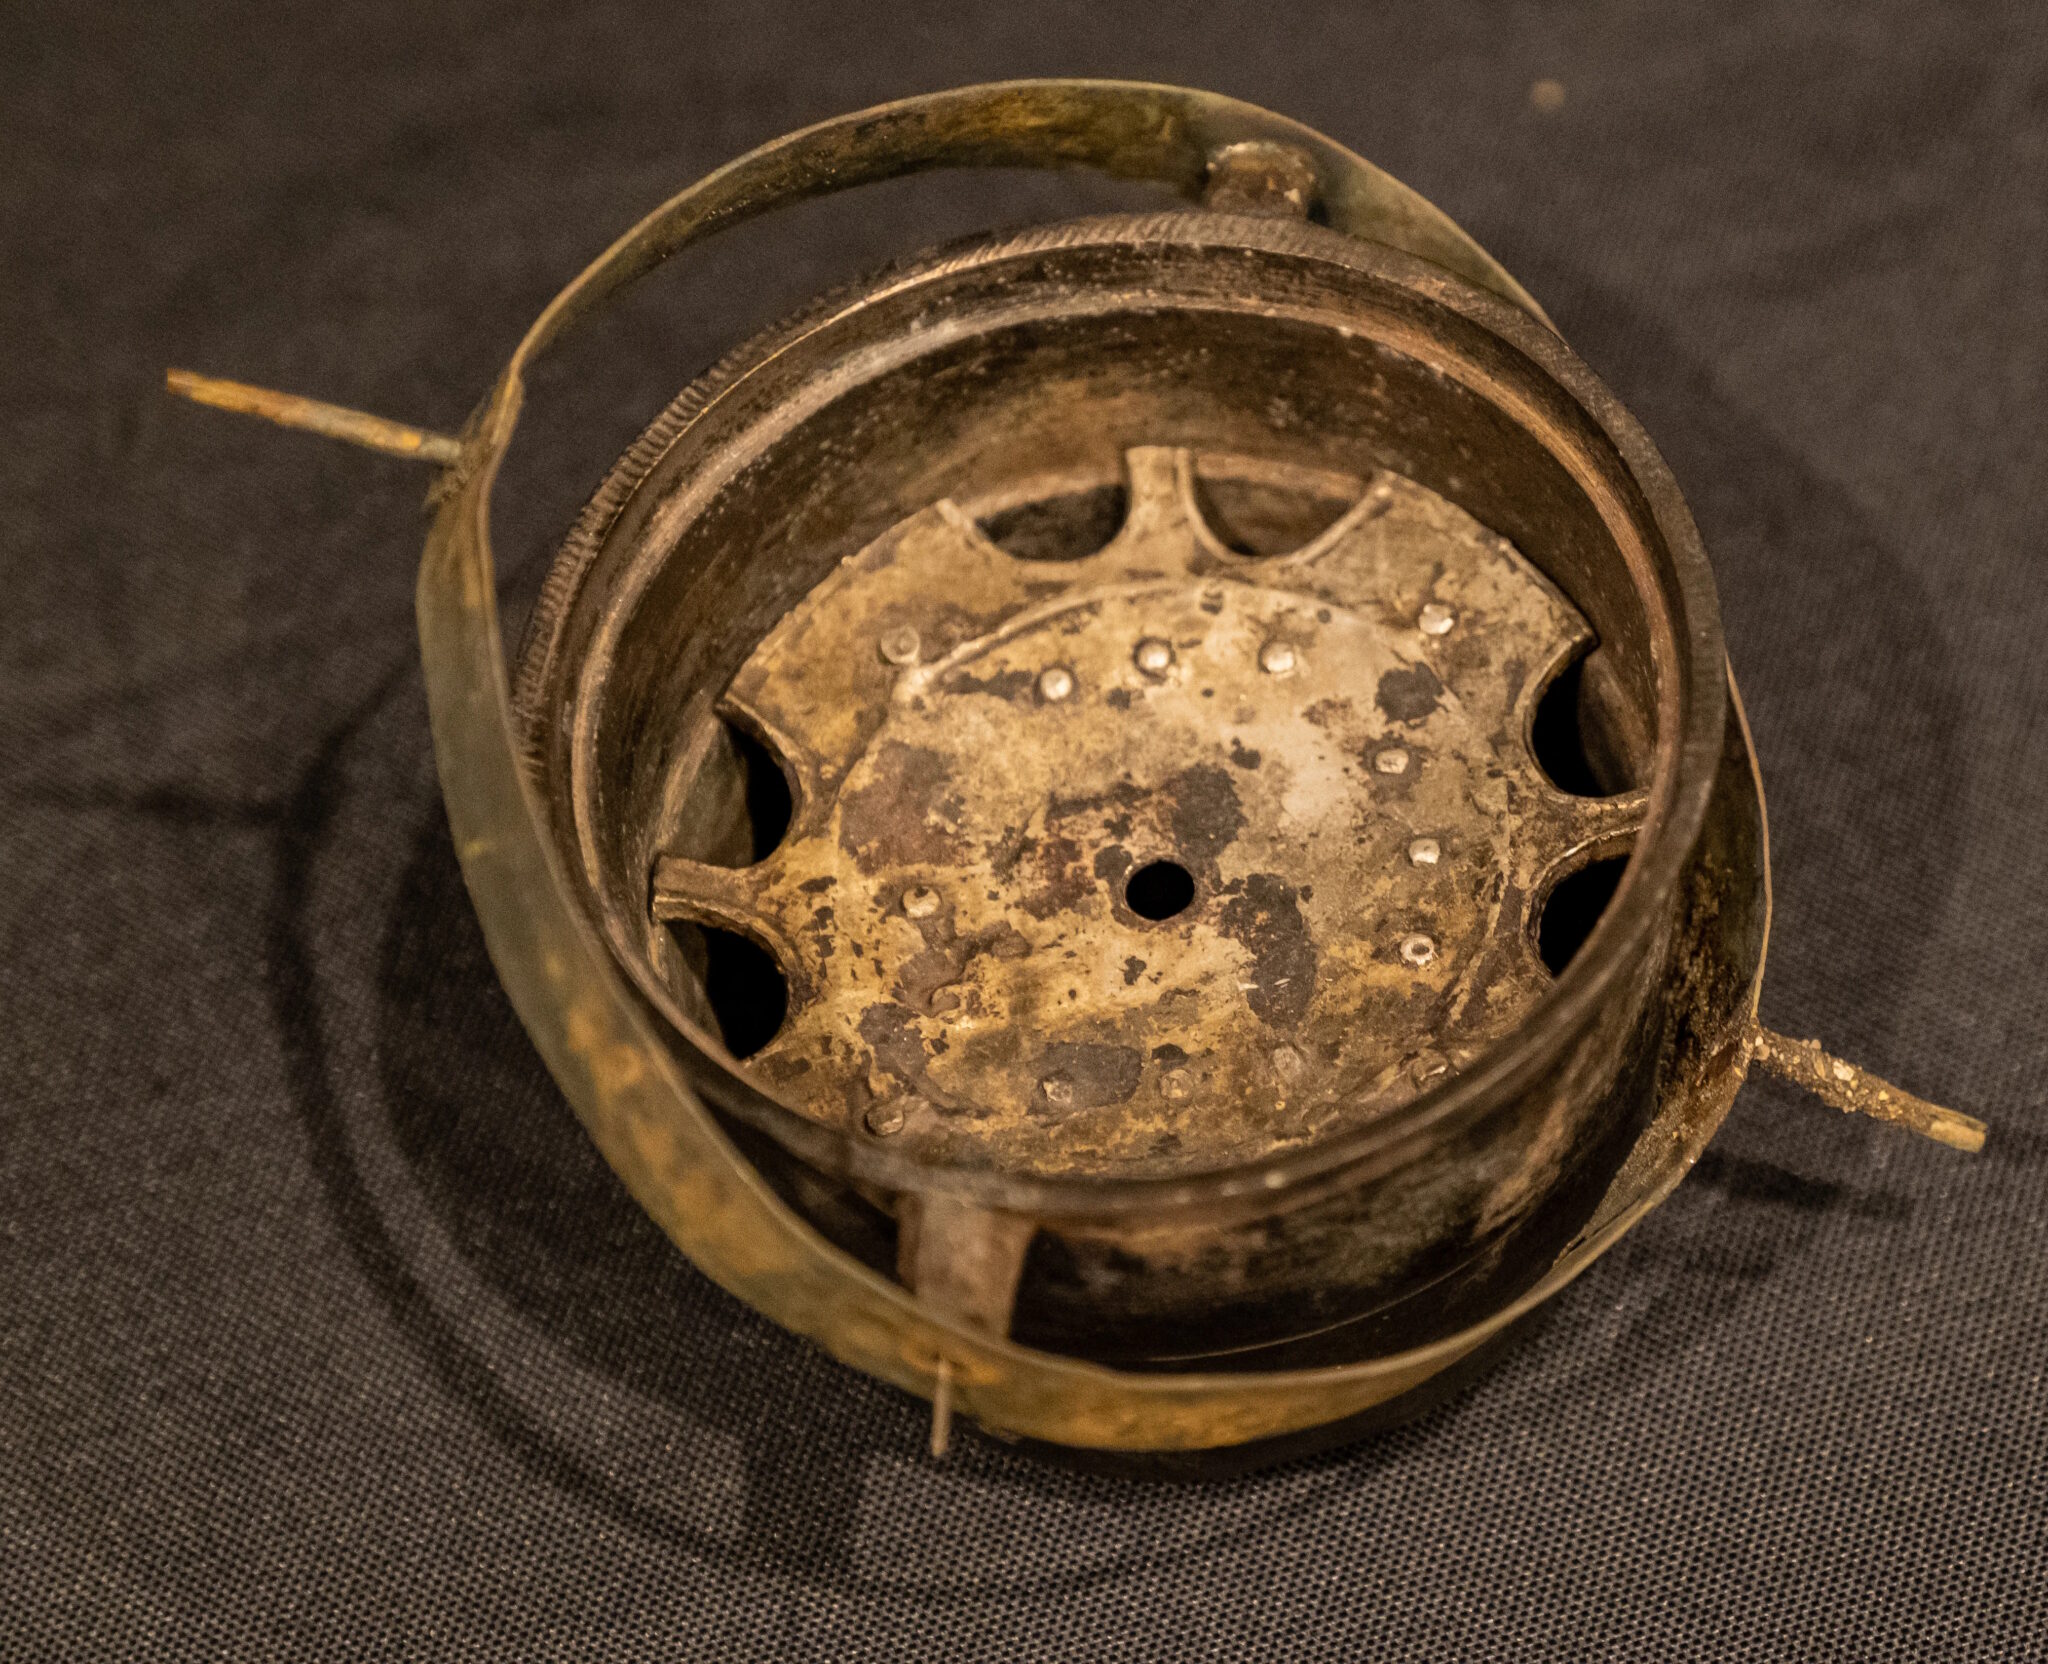 Europe’s oldest functioning compass found in Estonia wreck